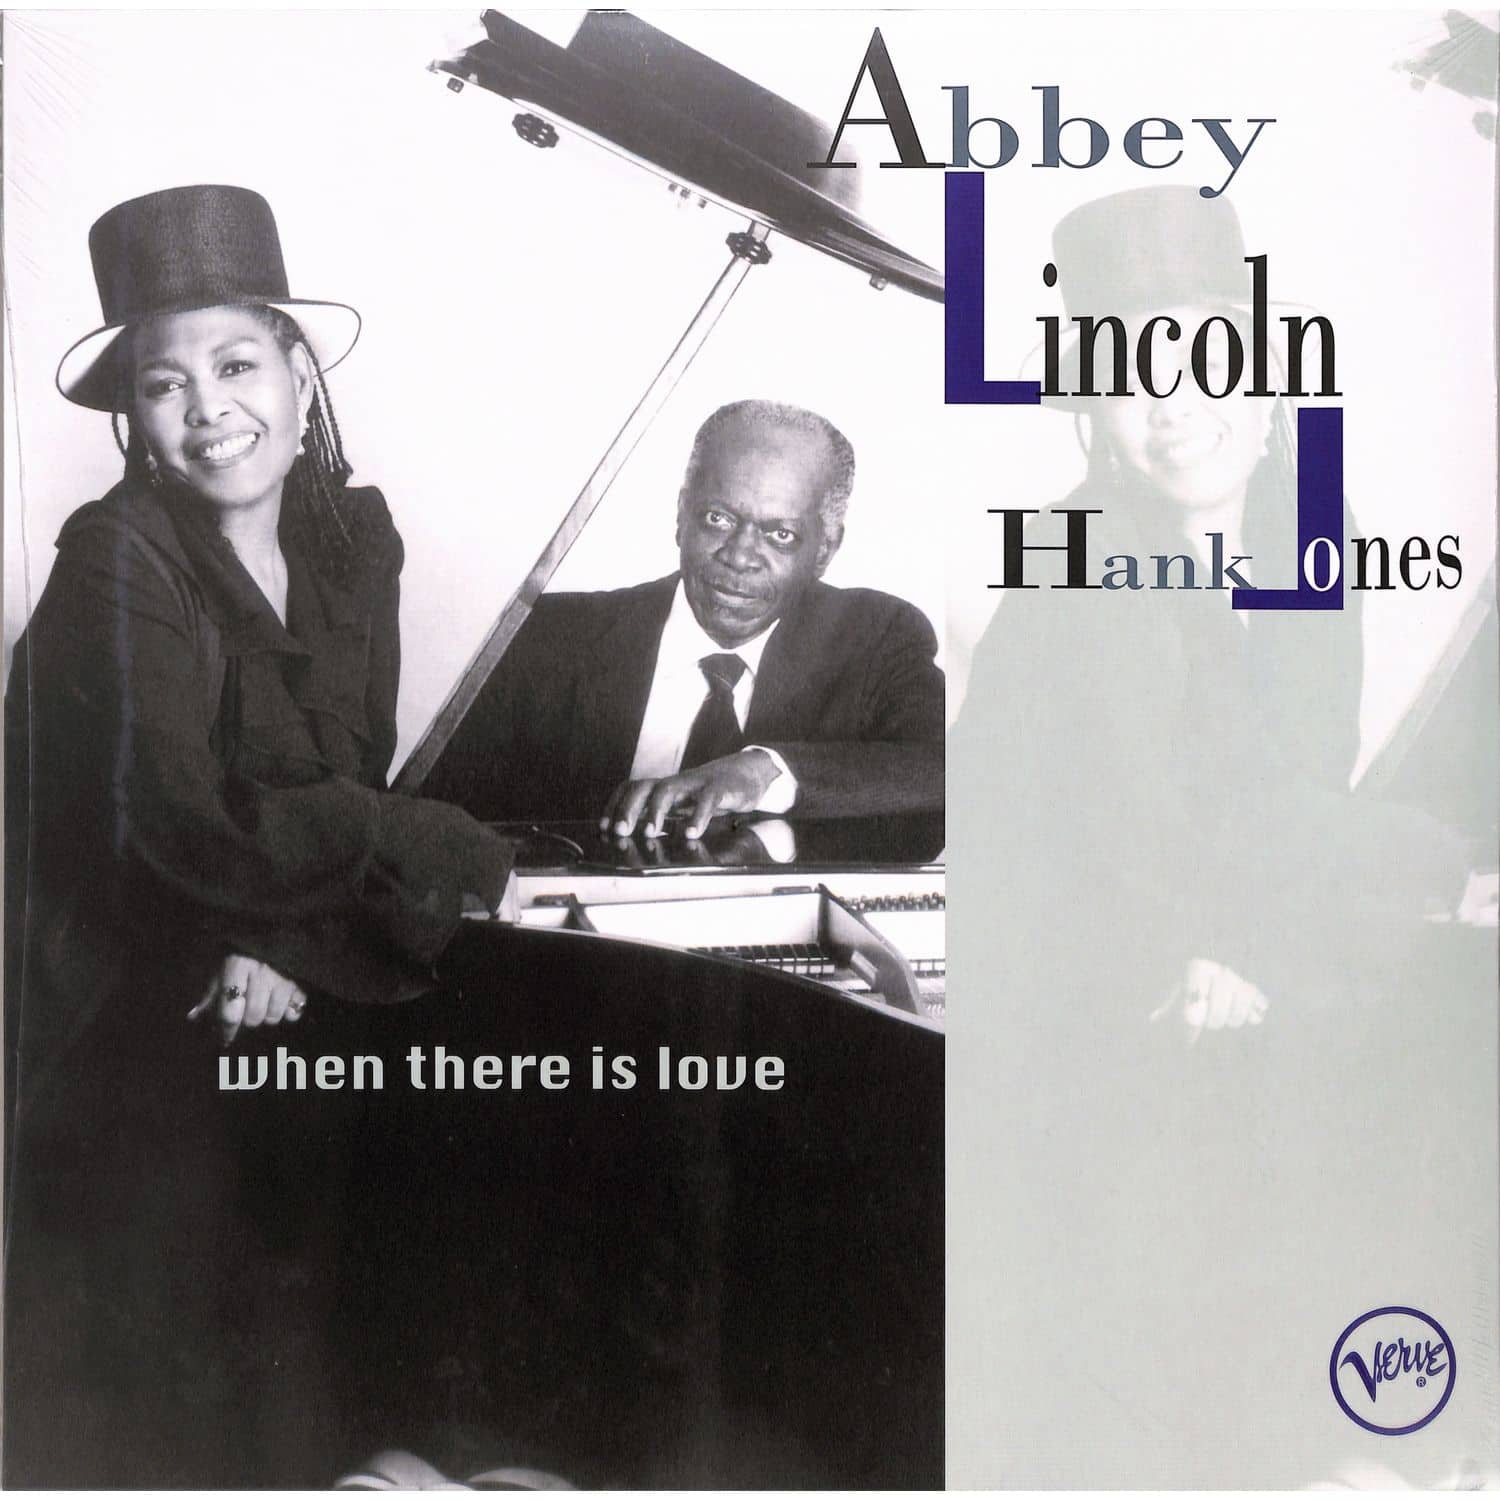 Abbey Lincoln / Hank Jones - WHEN THERE IS LOVE 